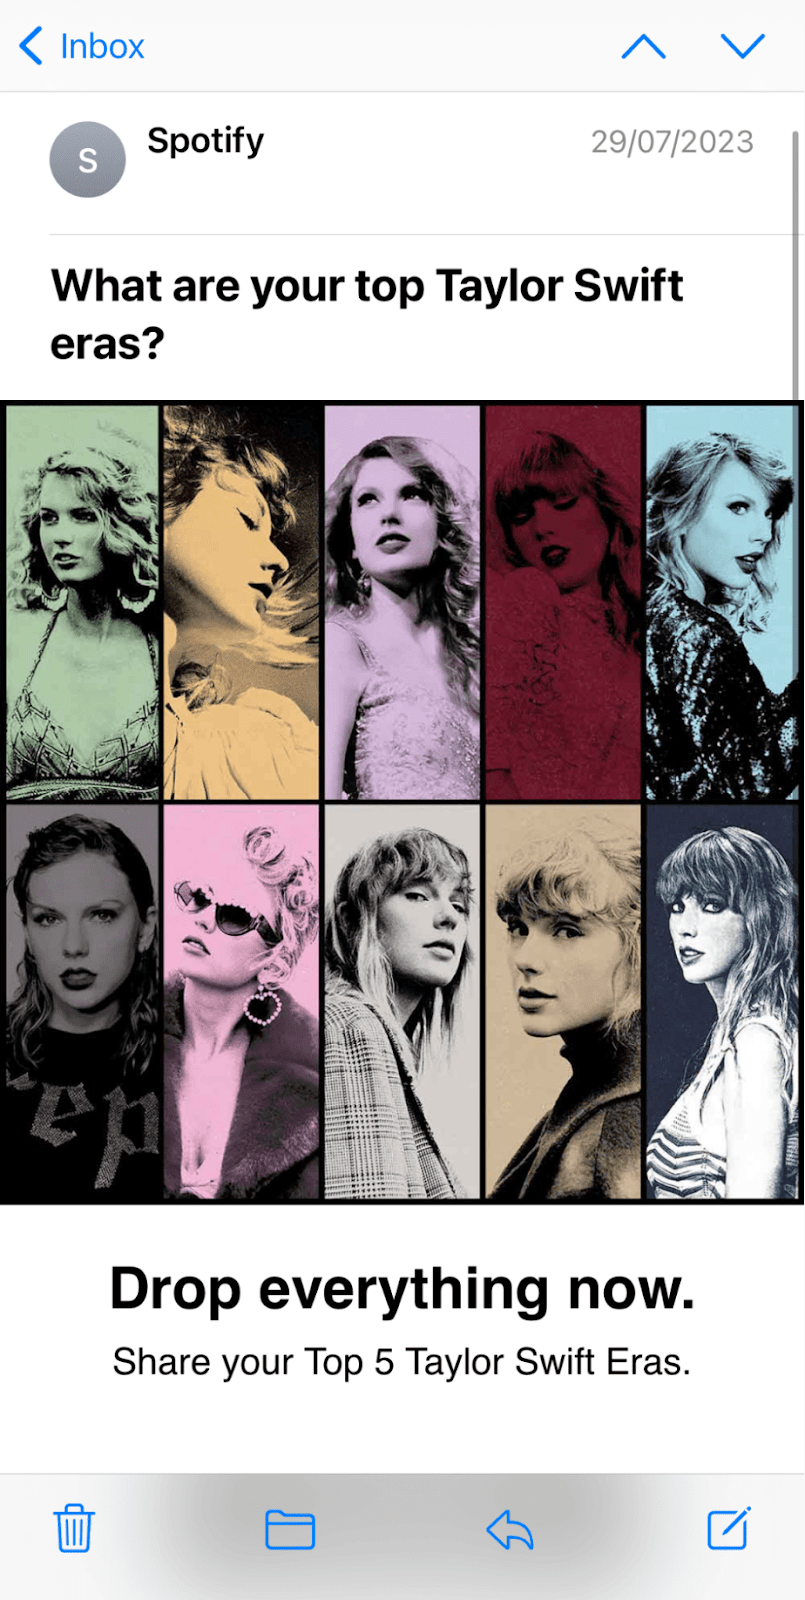 Spotify's "What are your top Taylor Swift eras?" email